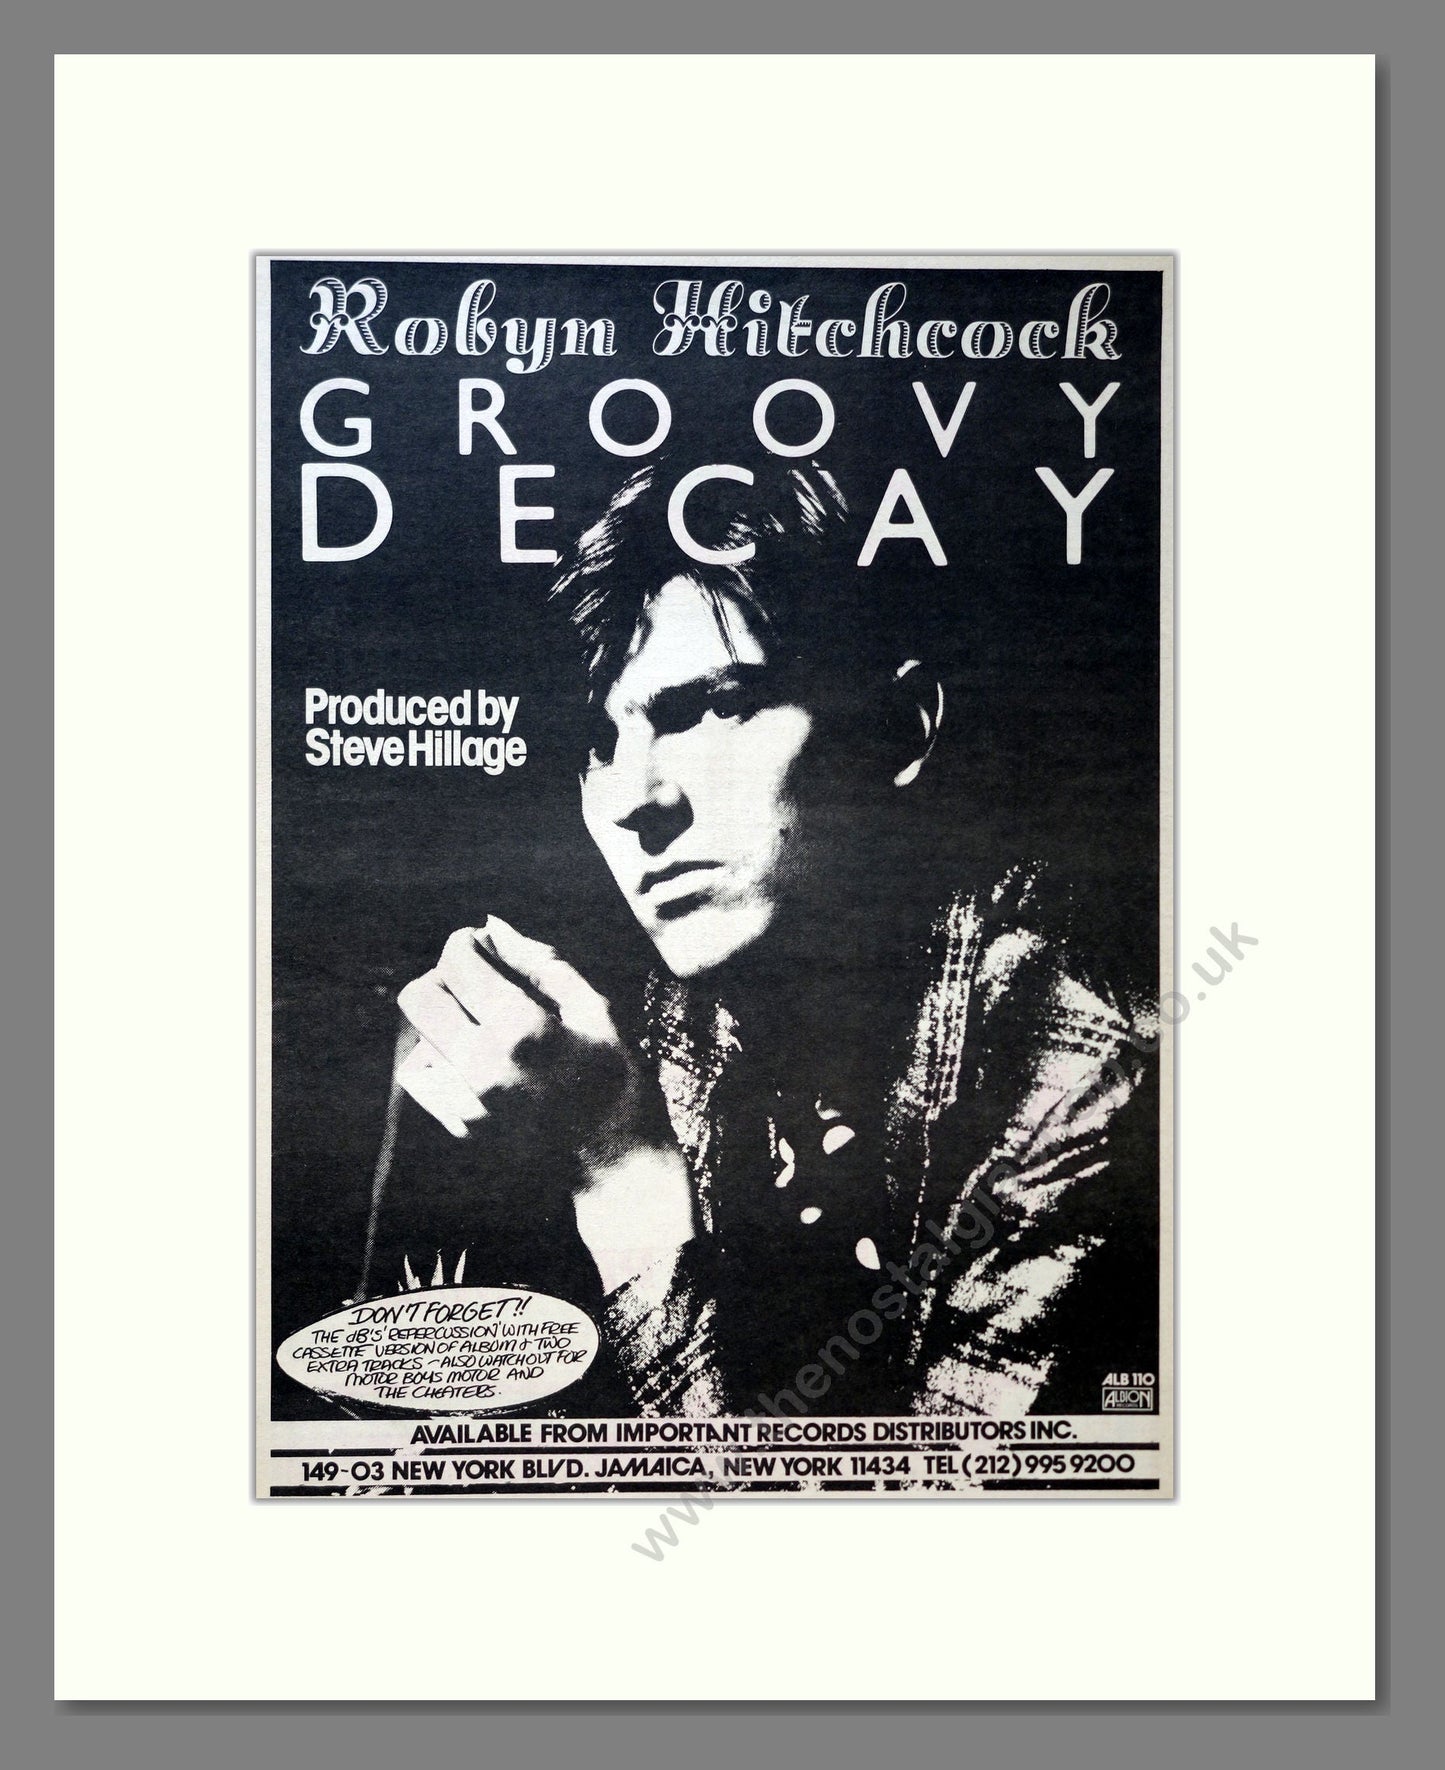 Robyn Hitchcock - Groovy Decay. Vintage Advert 1982 (ref AD18160)